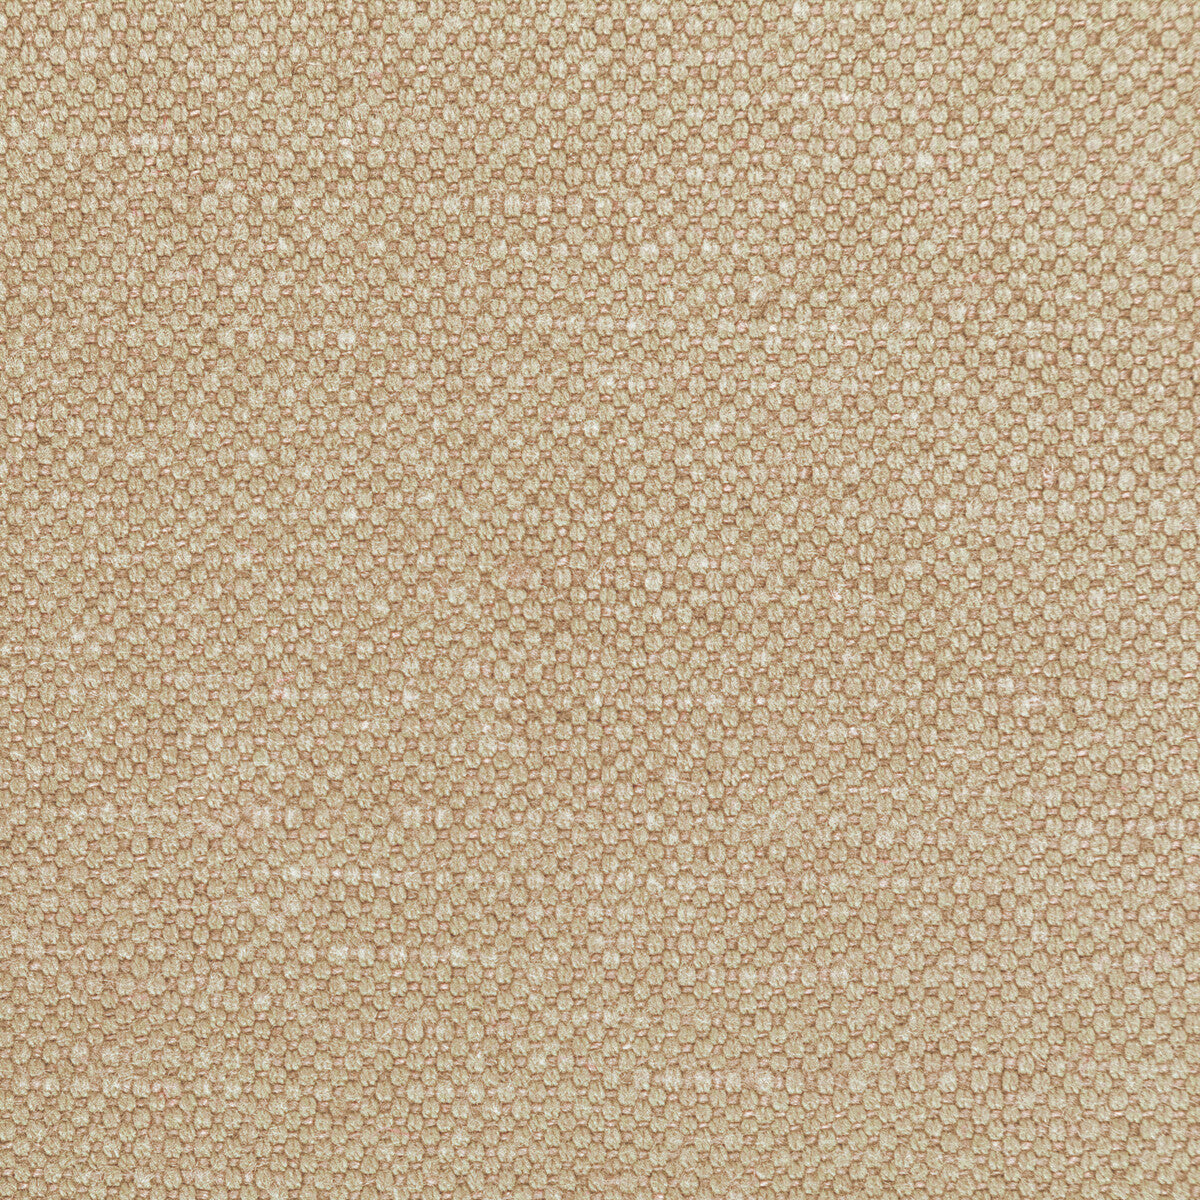 Carson fabric in oatmeal color - pattern 36282.116.0 - by Kravet Basics